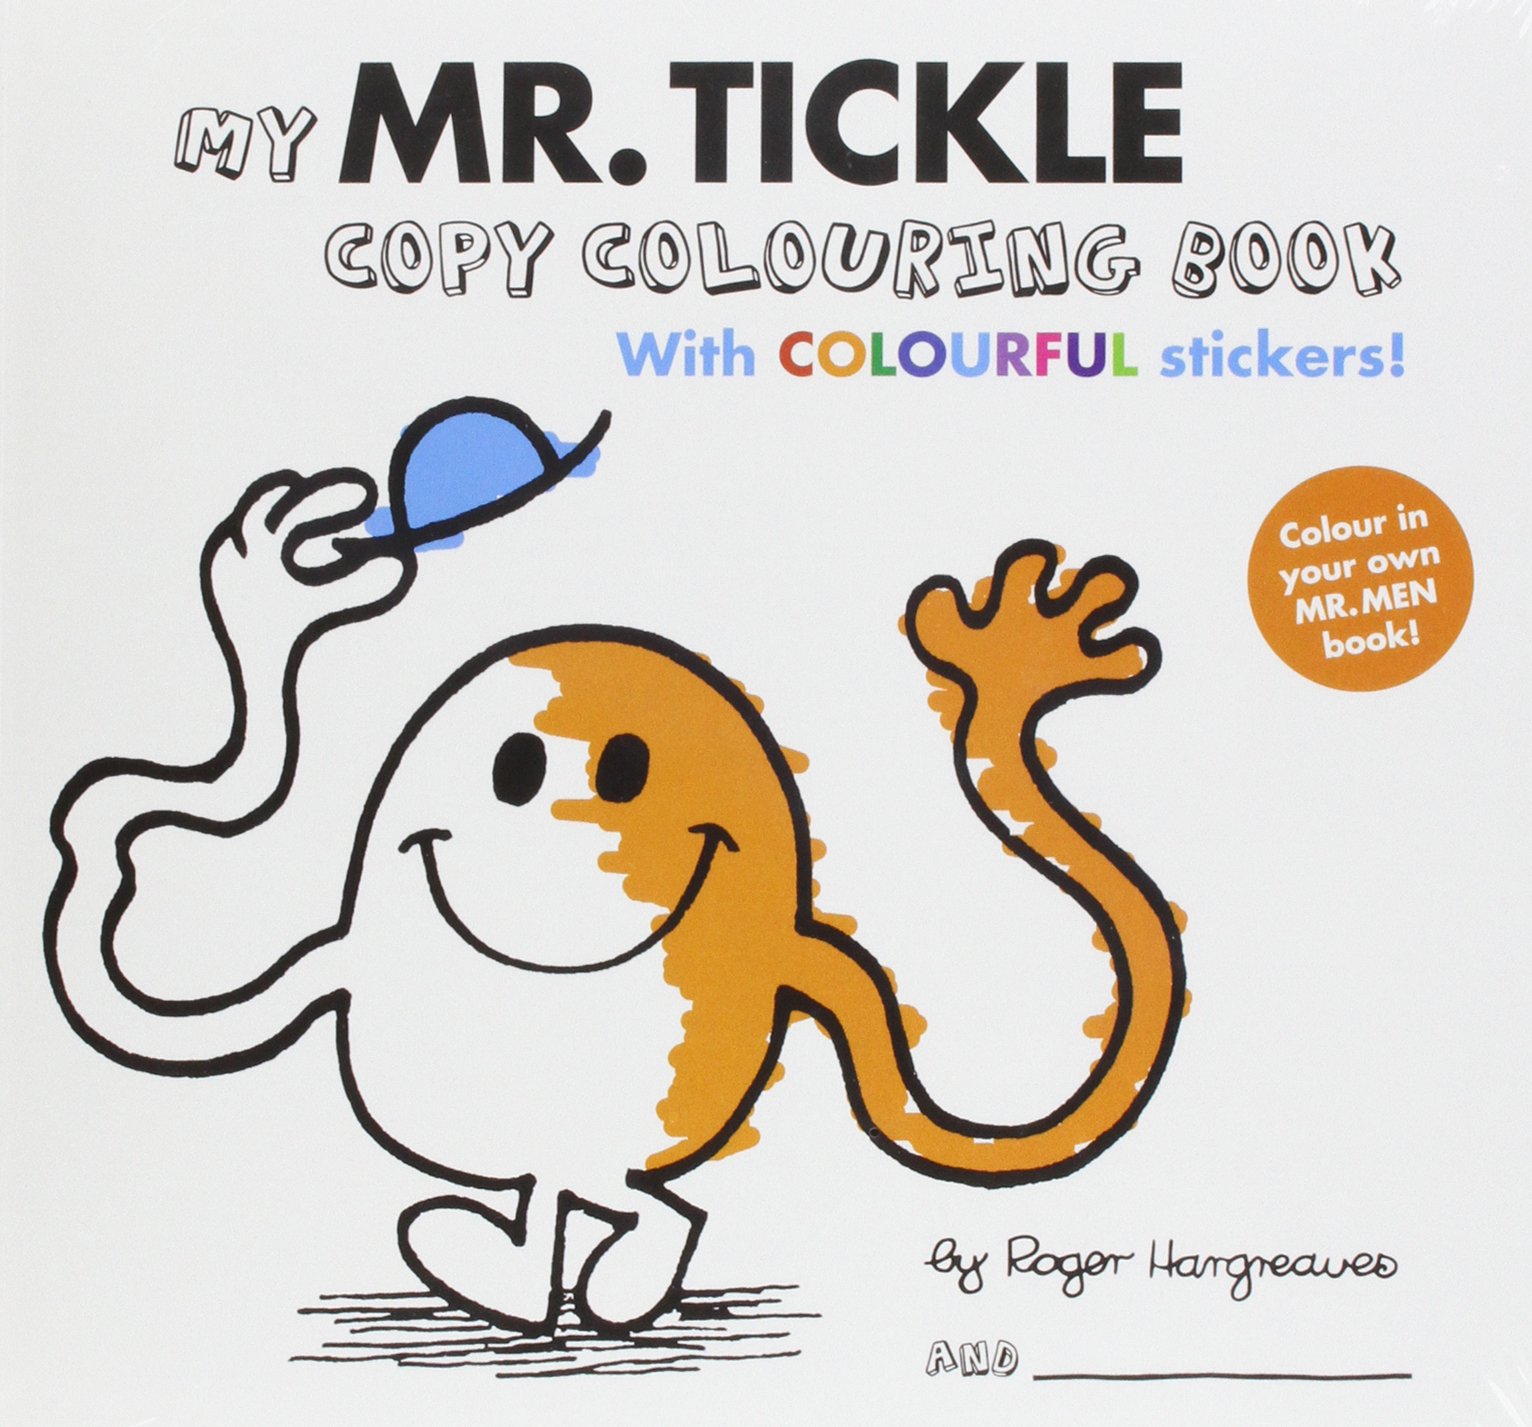 My Mr.Tickle Copy Colouring Book With Colourful Stickers